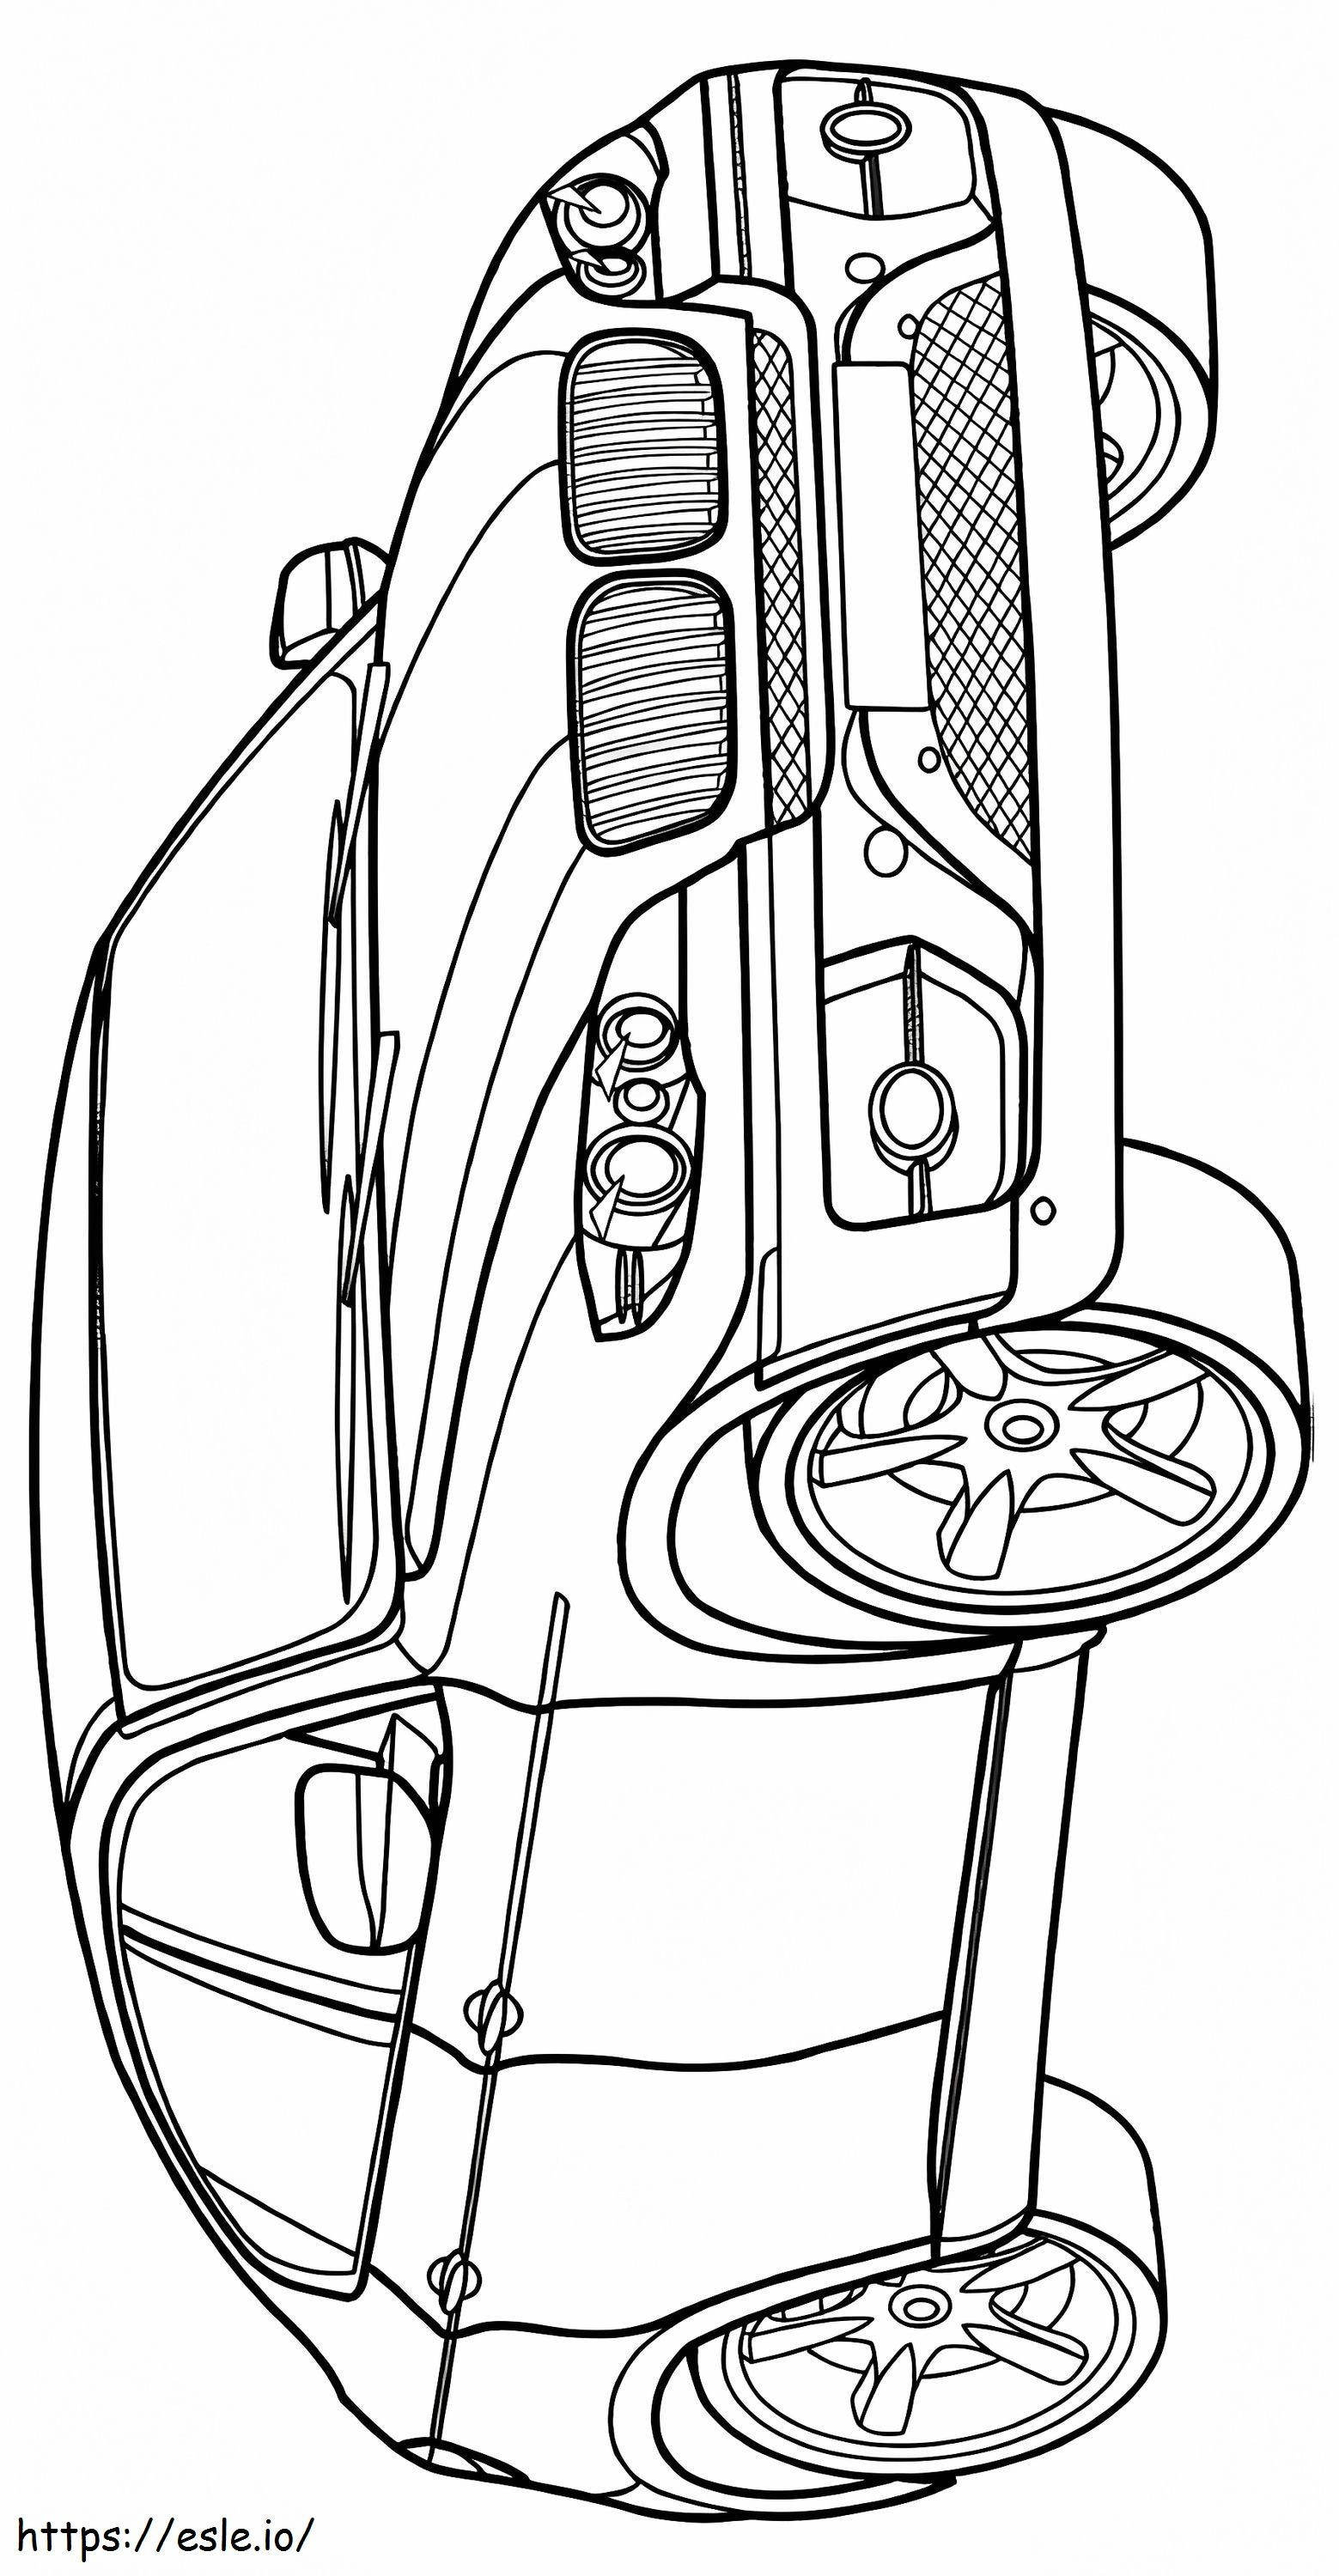 1560763907 2009 Bmw X6 A4 coloring page